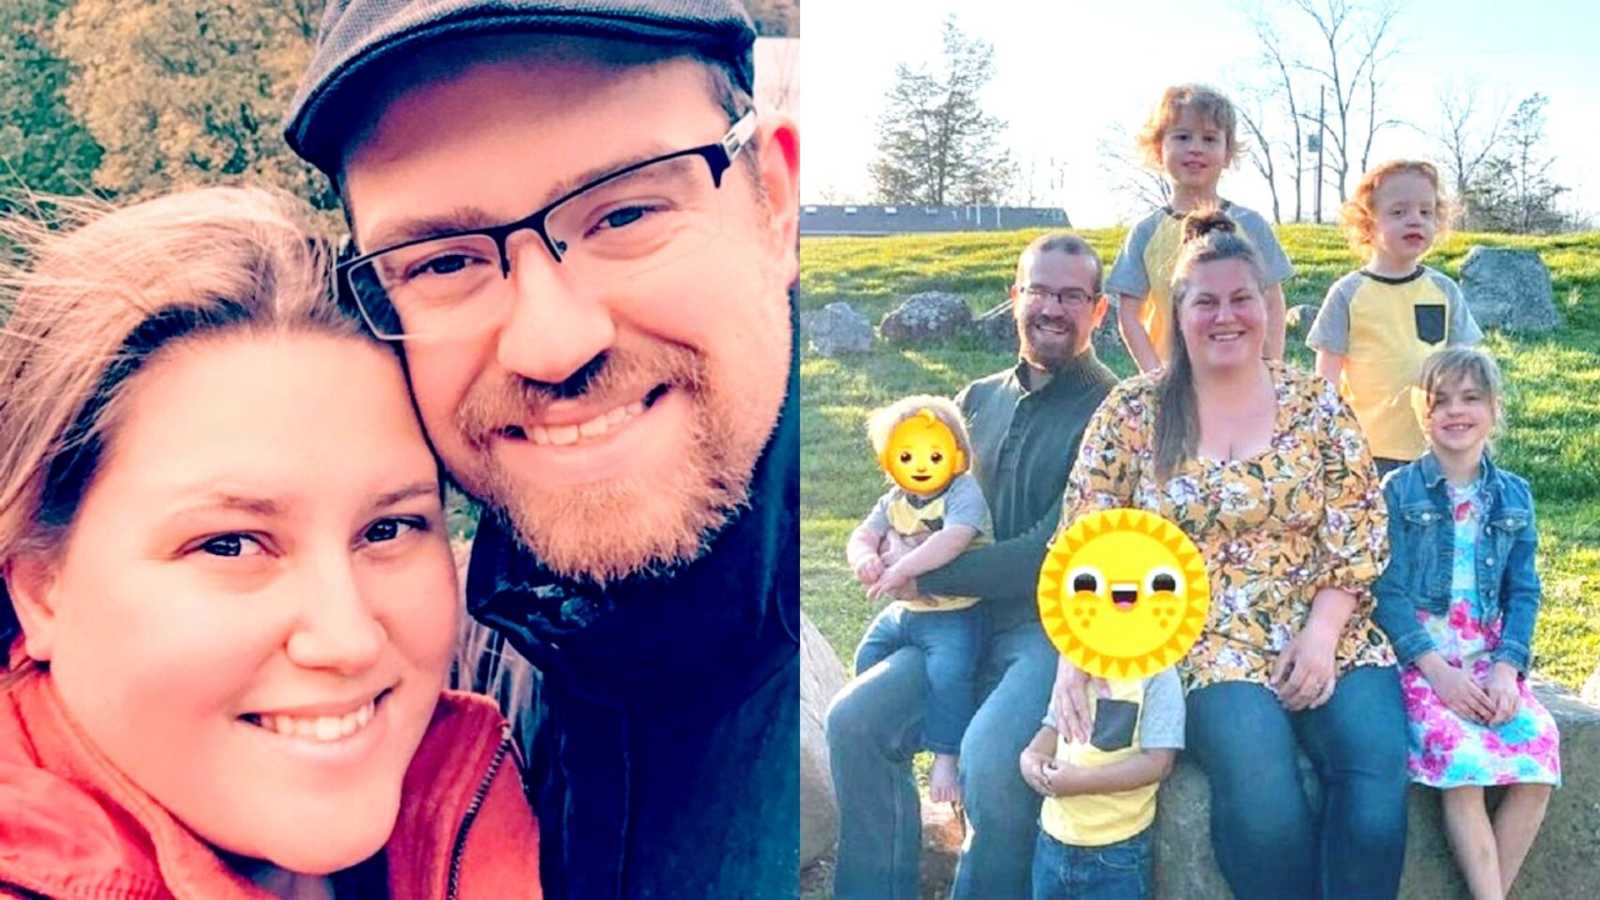 A mom and her husband stand together outdoors and foster parents sit with their 3 kids and 2 foster kids